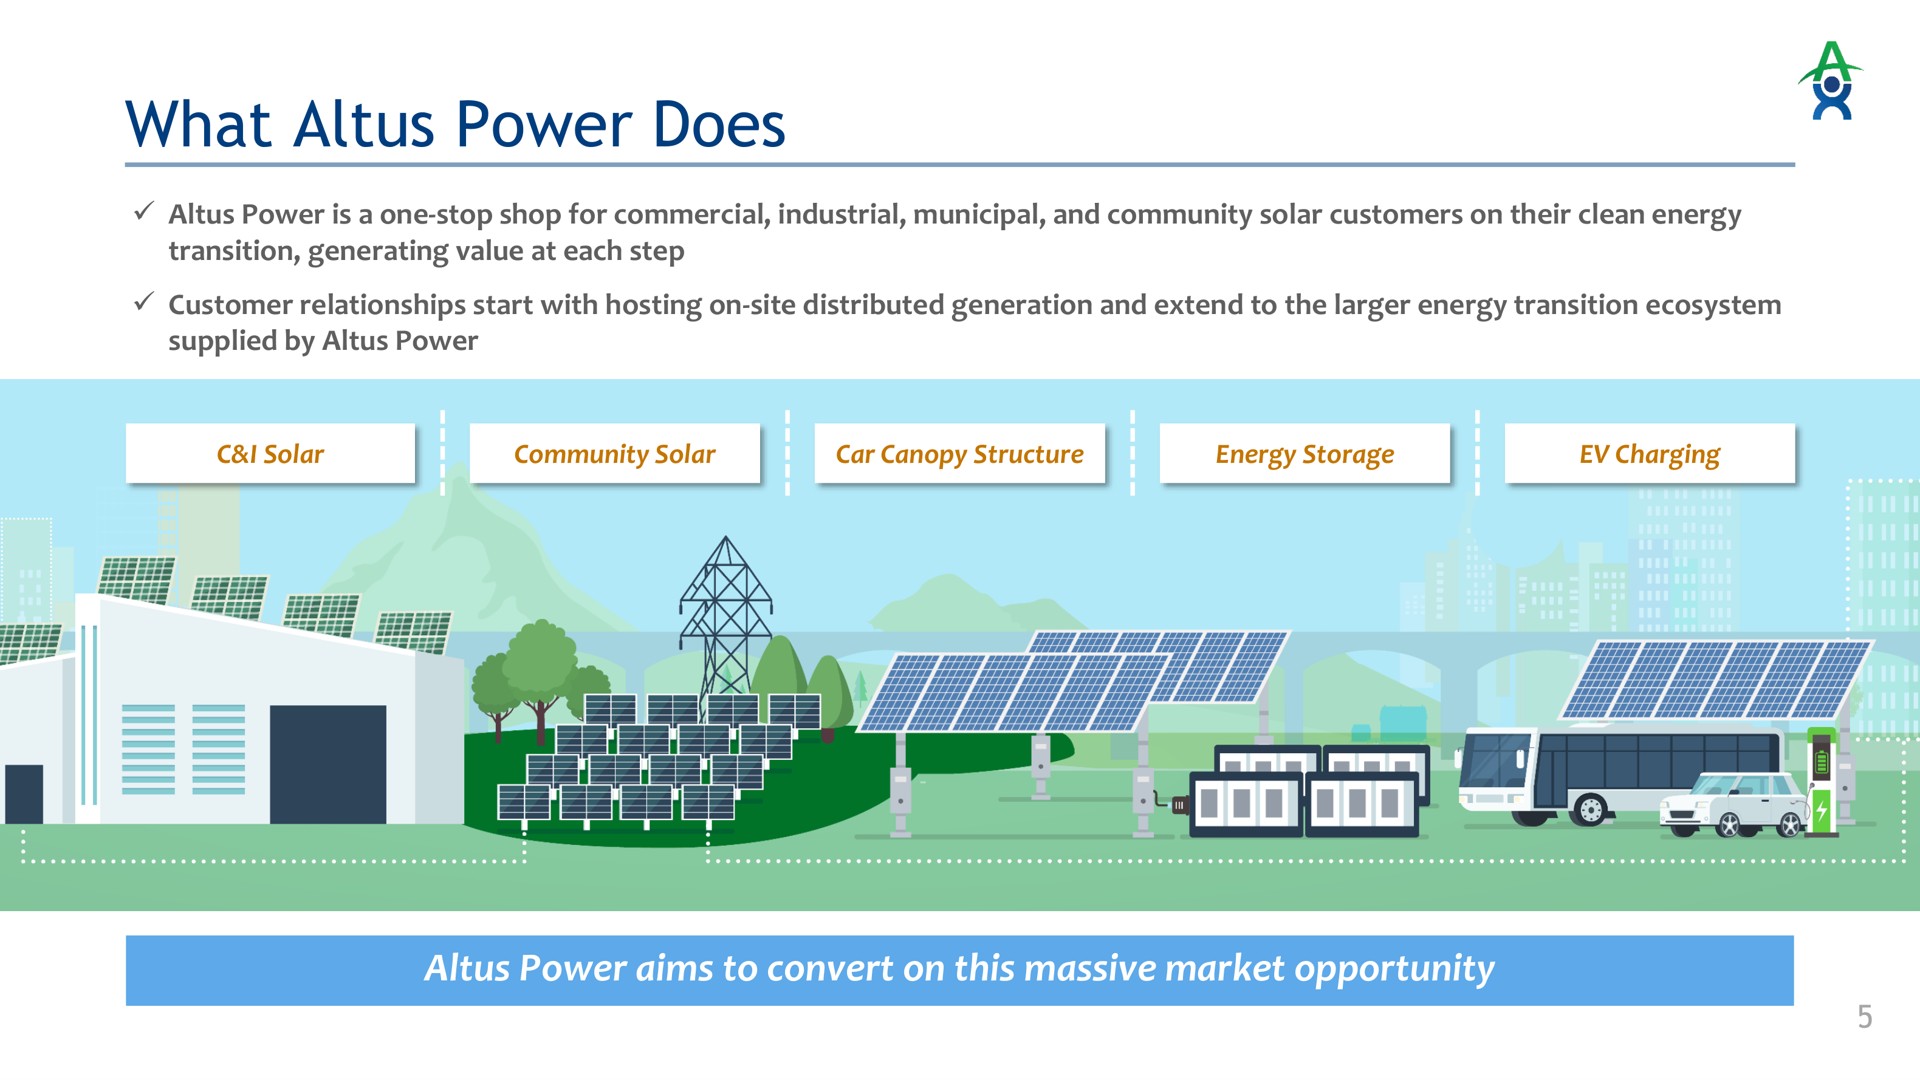 what power does power aims to convert on this massive market opportunity | Altus Power